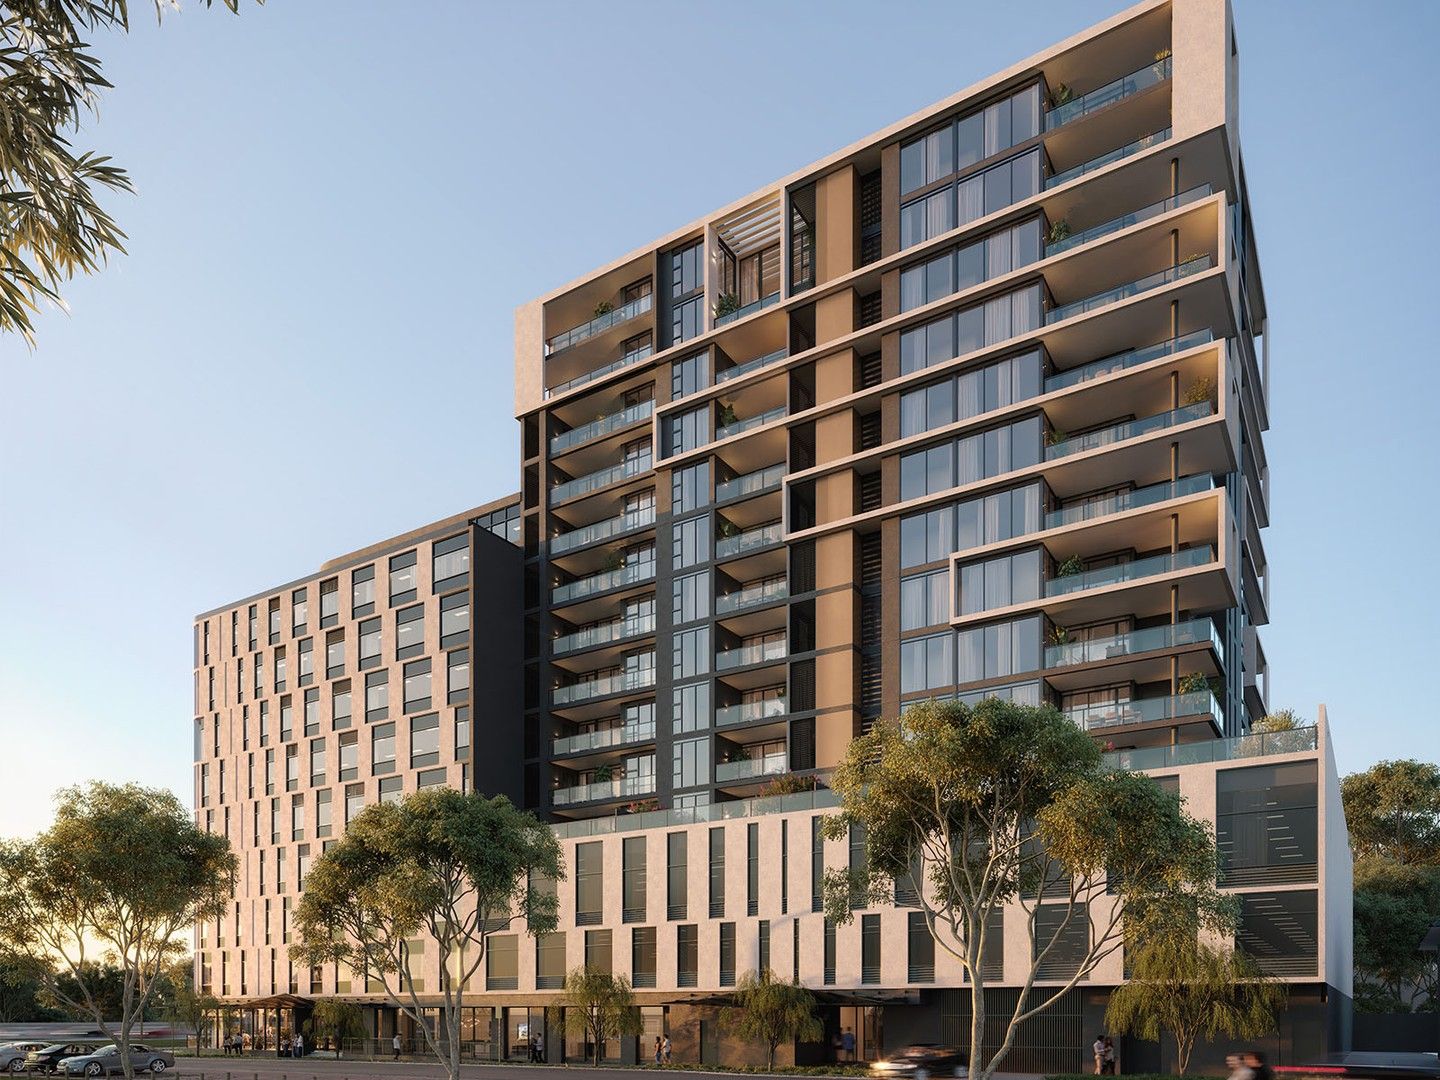 1 bedrooms New Apartments / Off the Plan in 11/1 Richardson Street SOUTH PERTH WA, 6151